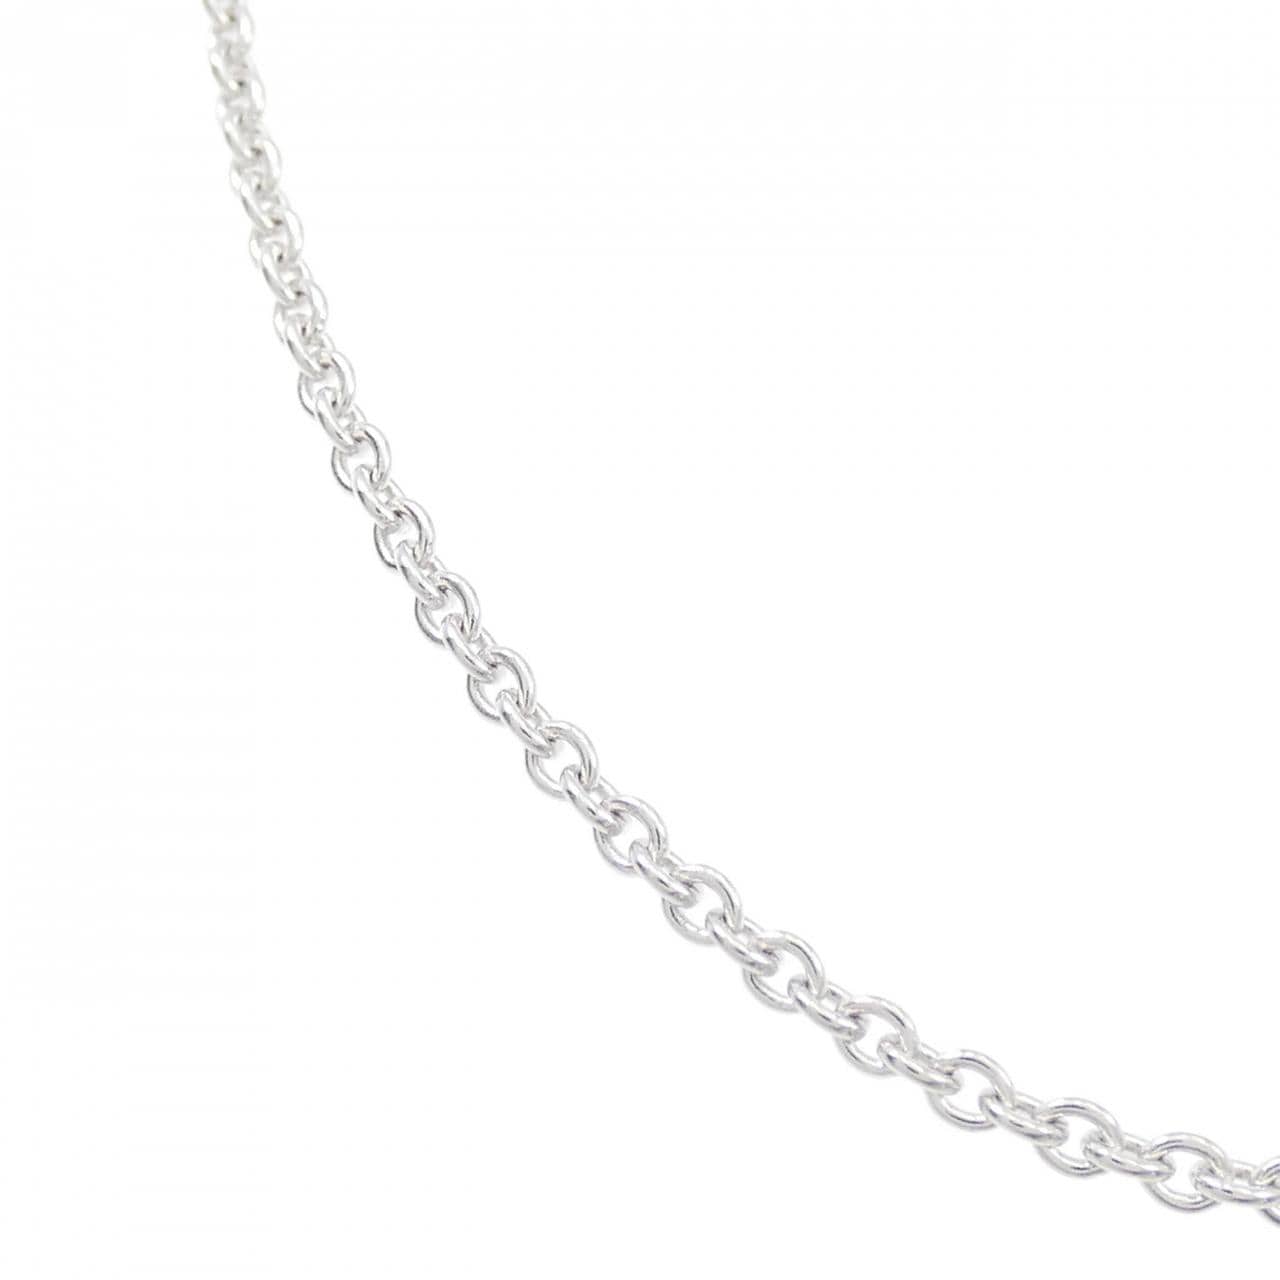 750WG chain necklace